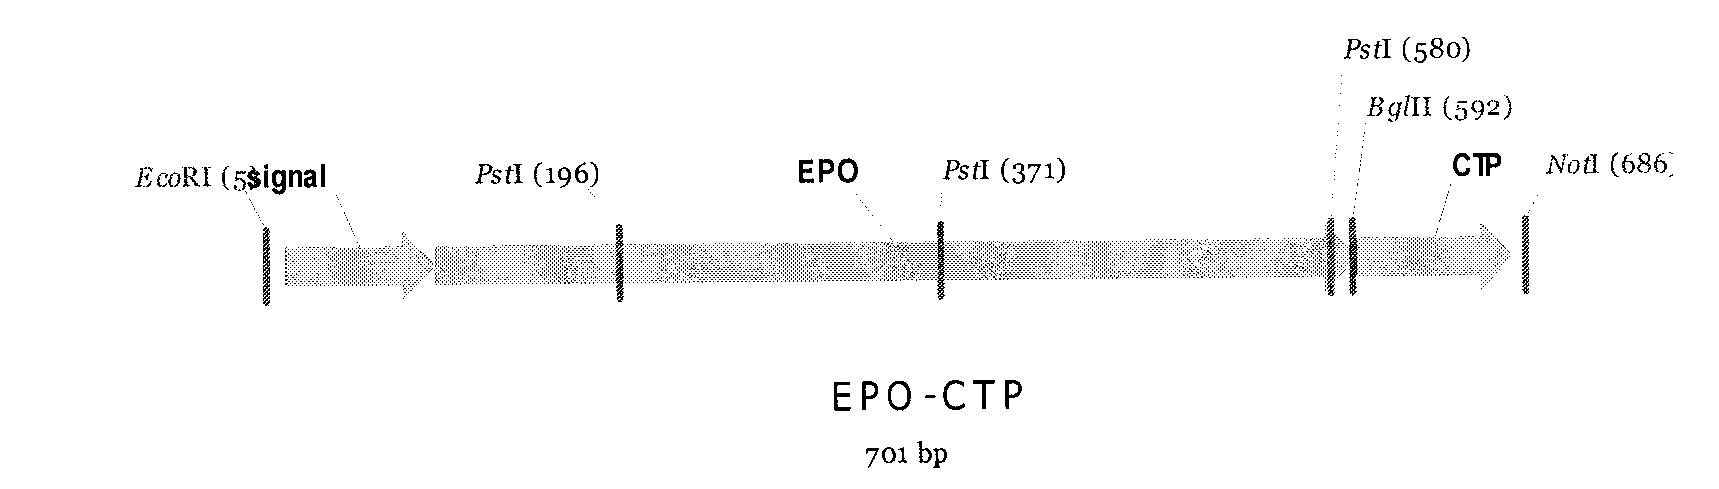 Recombinant human erythropoietin-CTP fusion protein production process and application